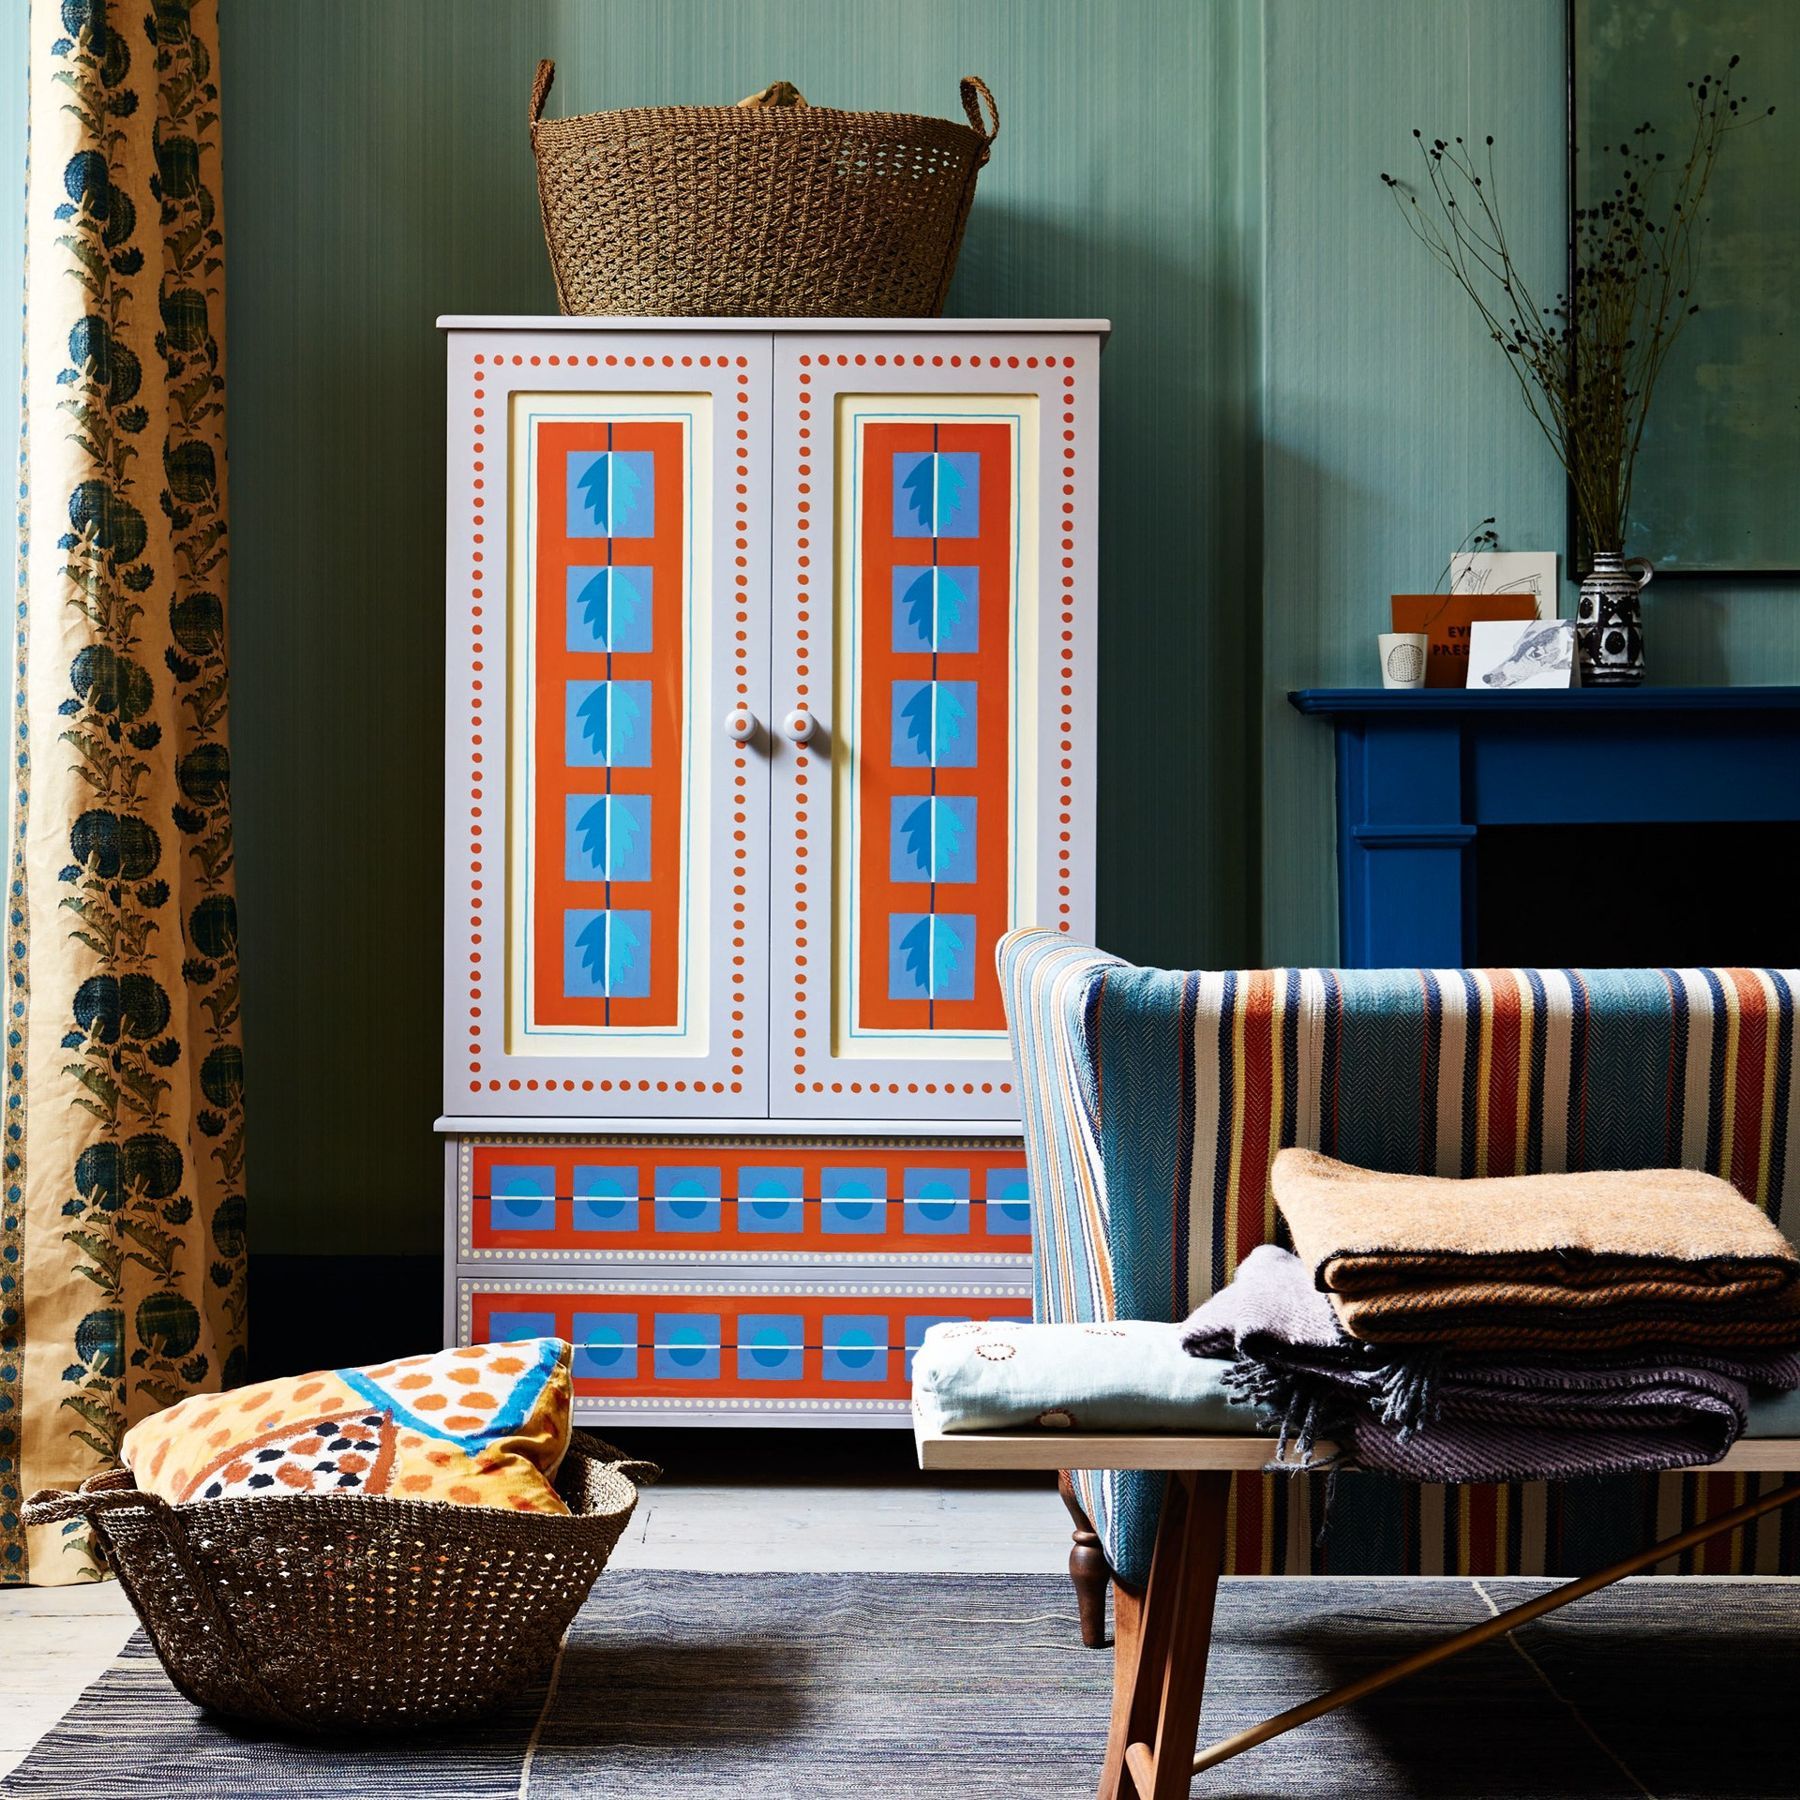 Hand painted furniture adding color to
  your furnishing